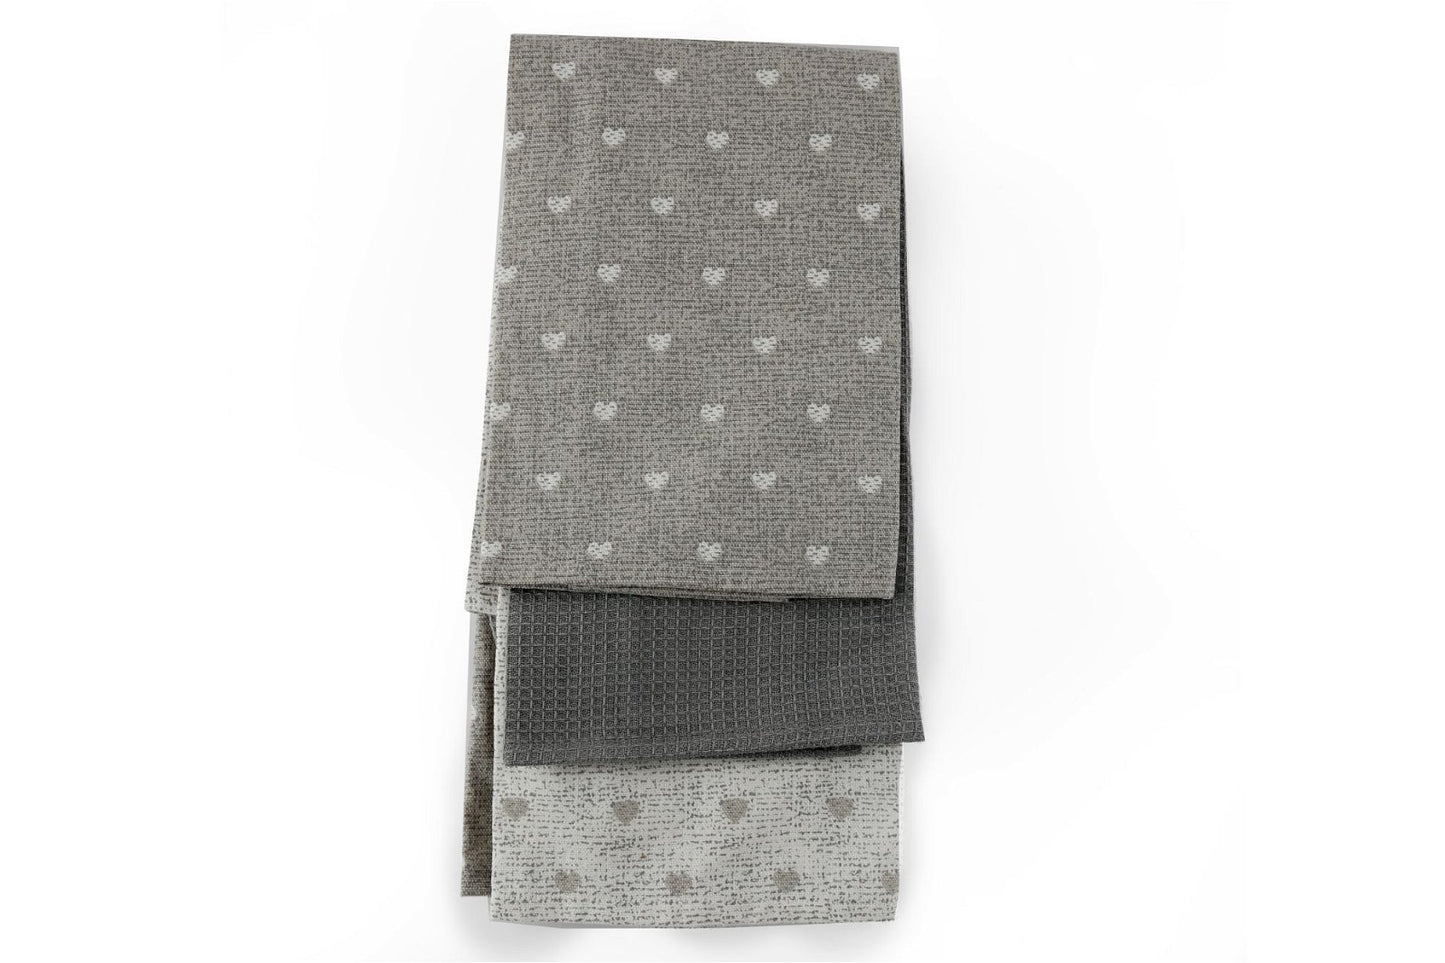 Pack of 3 Kitchen Tea Towels With A Grey Heart Print Design - Kaftan direct